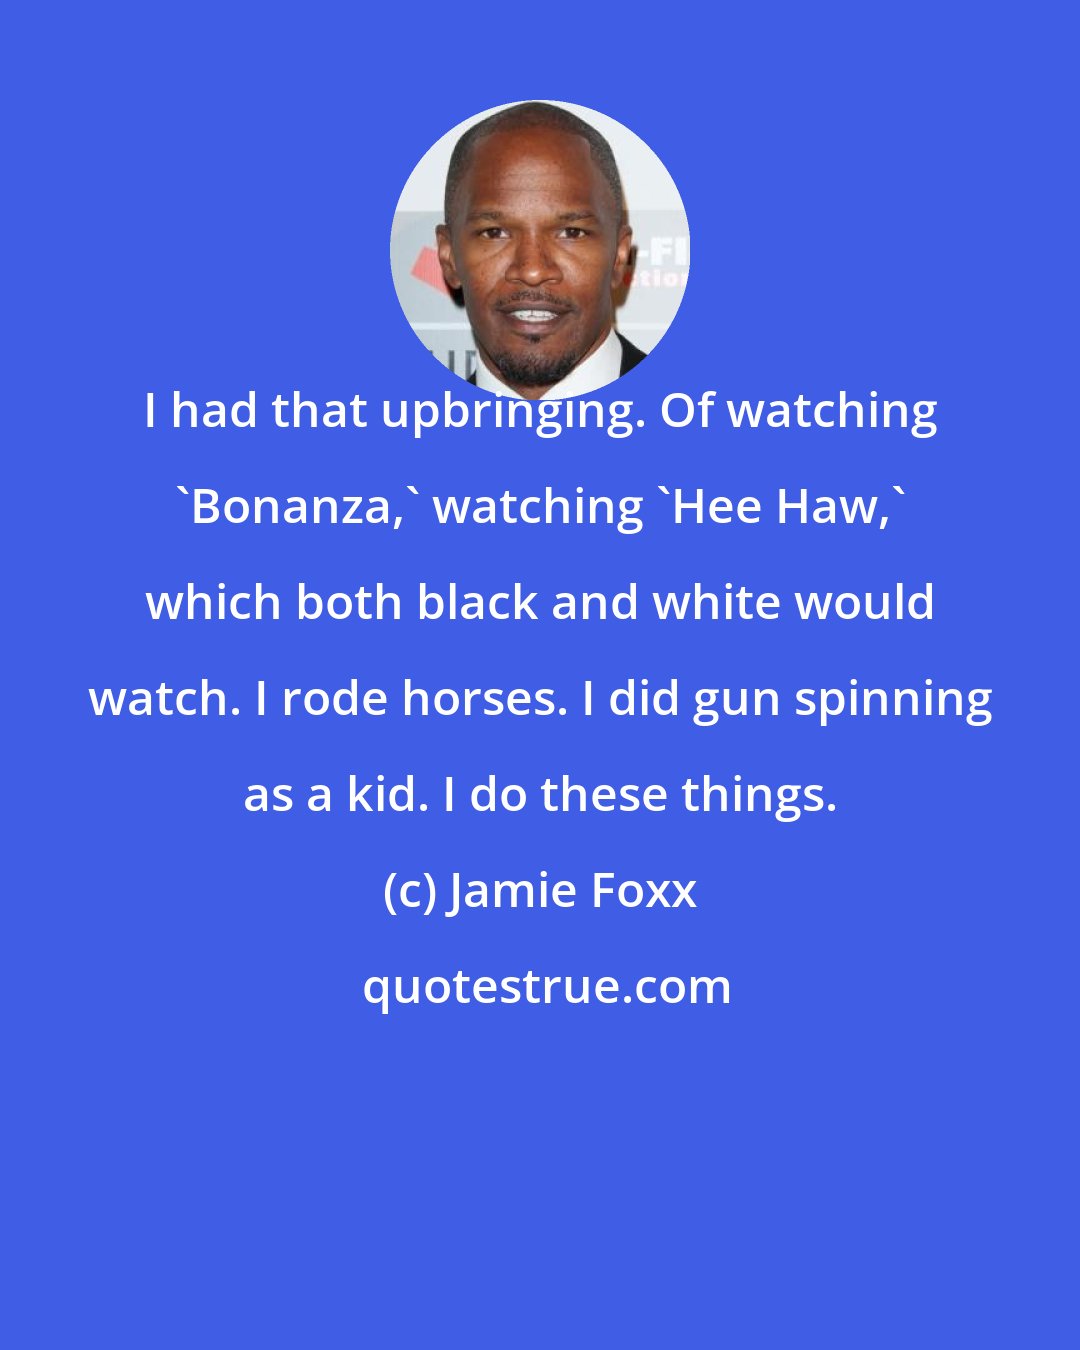 Jamie Foxx: I had that upbringing. Of watching 'Bonanza,' watching 'Hee Haw,' which both black and white would watch. I rode horses. I did gun spinning as a kid. I do these things.